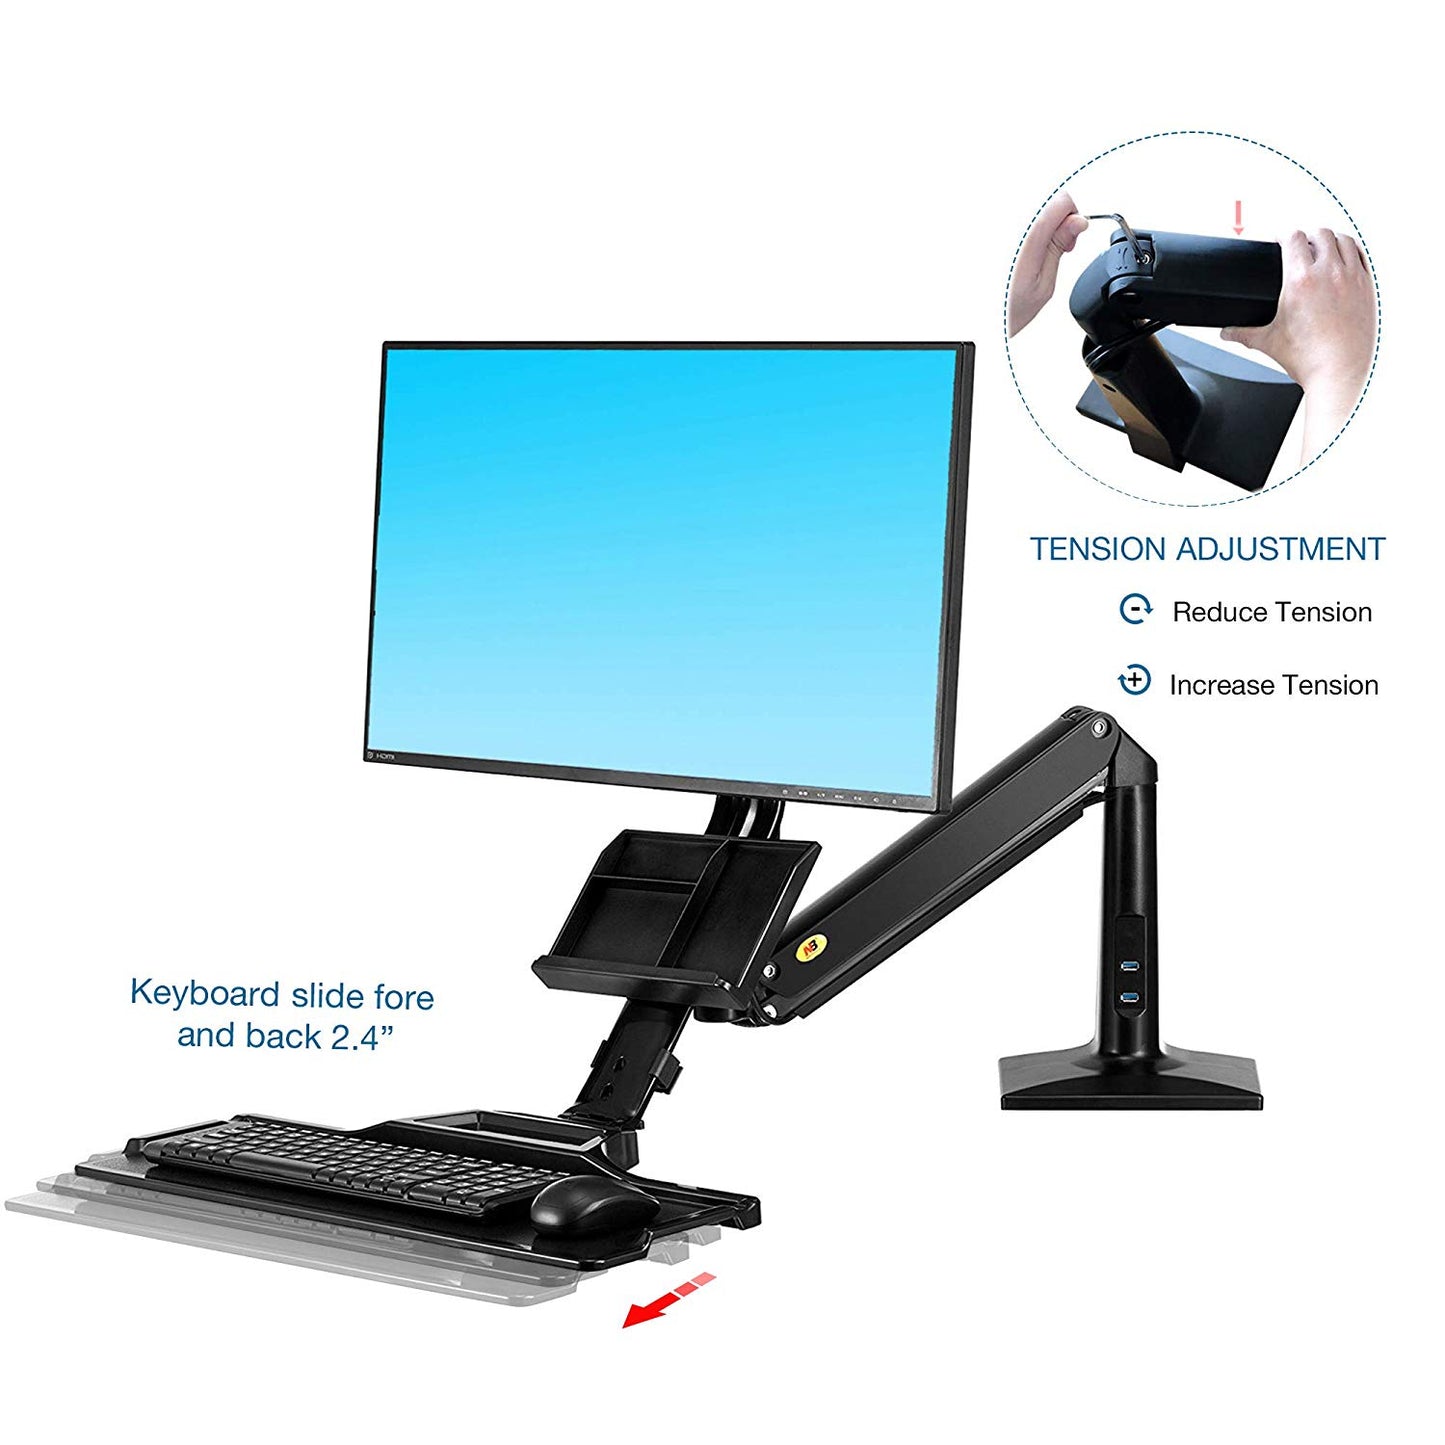 NB North Bayou Sit Stand Desk Converter Height Adjustable Standing Desk Workstation for 22''-35'' Monitor Mount Arm with Keyboard Tray FC35 (White-for 22''-35'' Monitor Within 6.6~19.8 lbs)